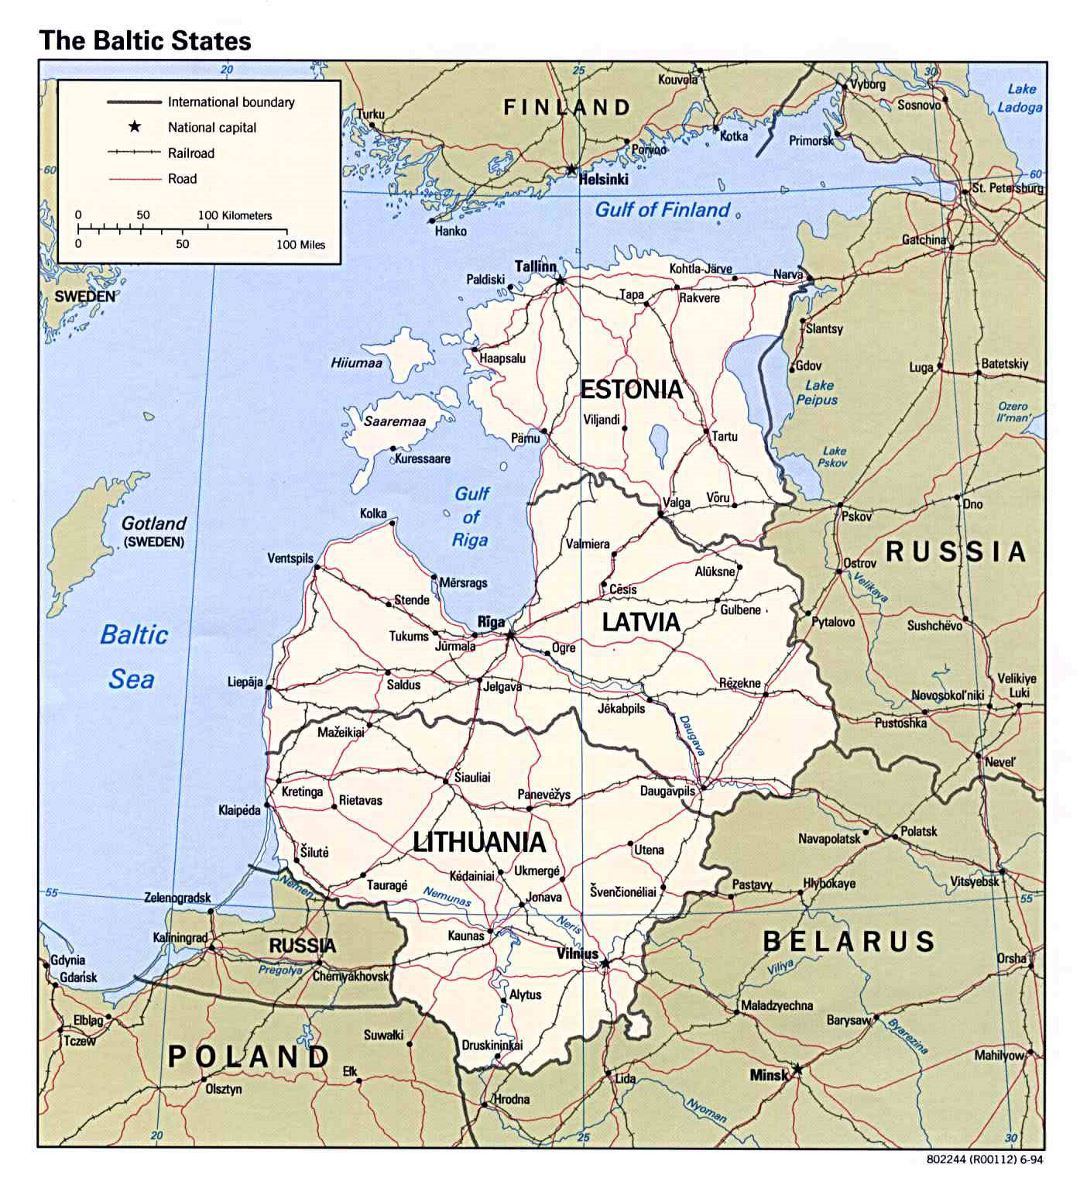 Large map of the Baltic States - 1994